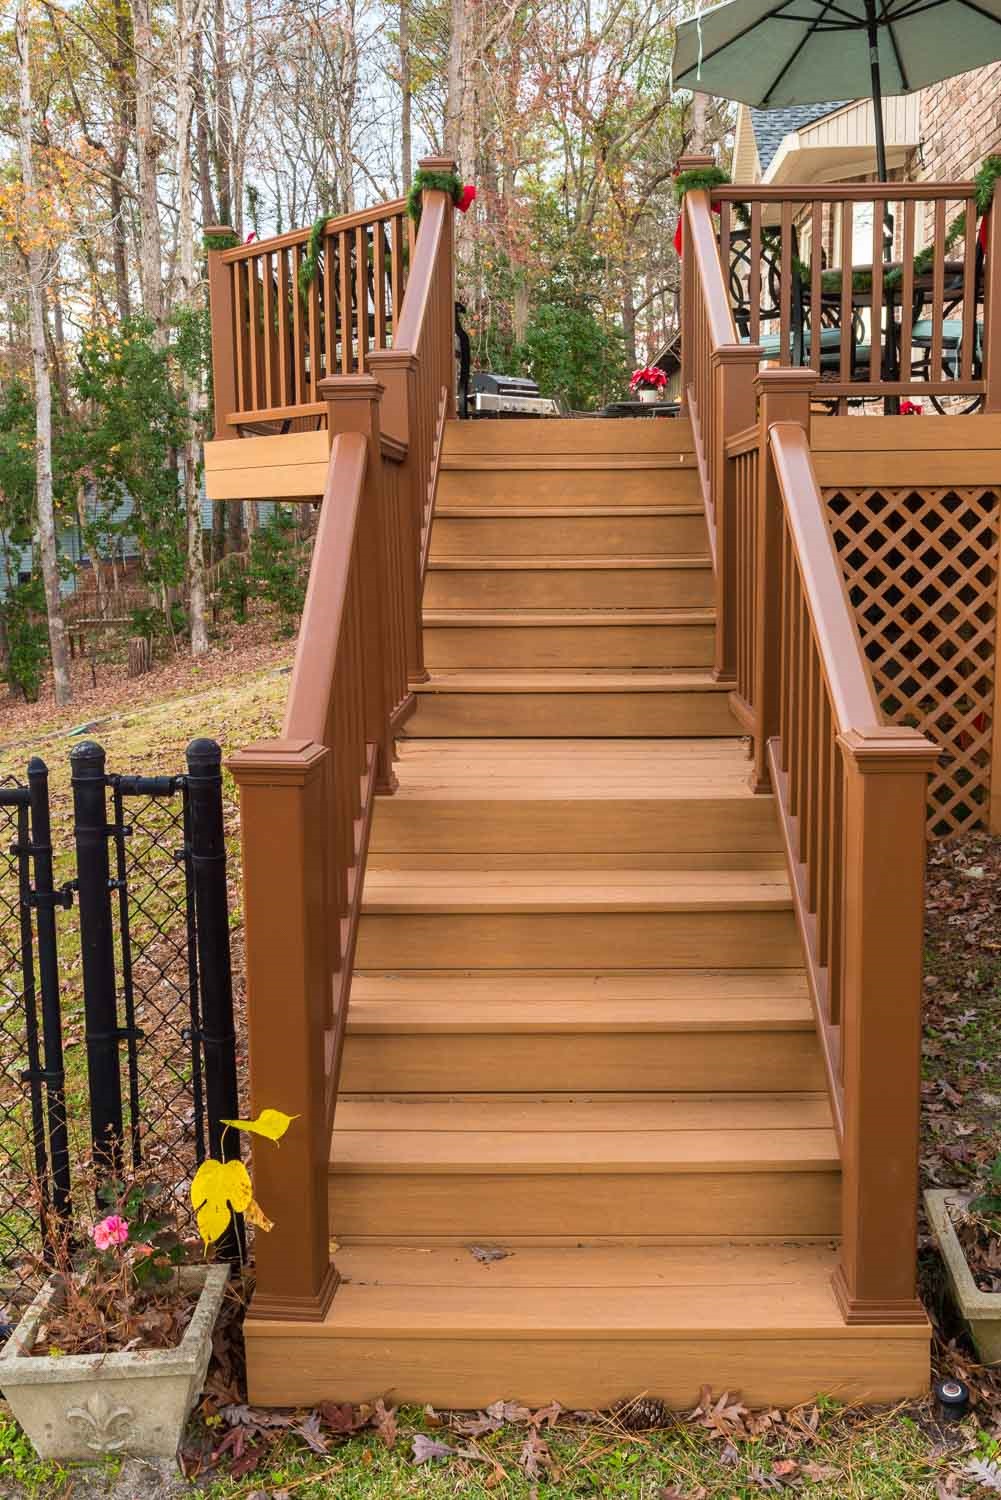 Custom Decks Porches Patios Sunrooms And More Archadeck Of